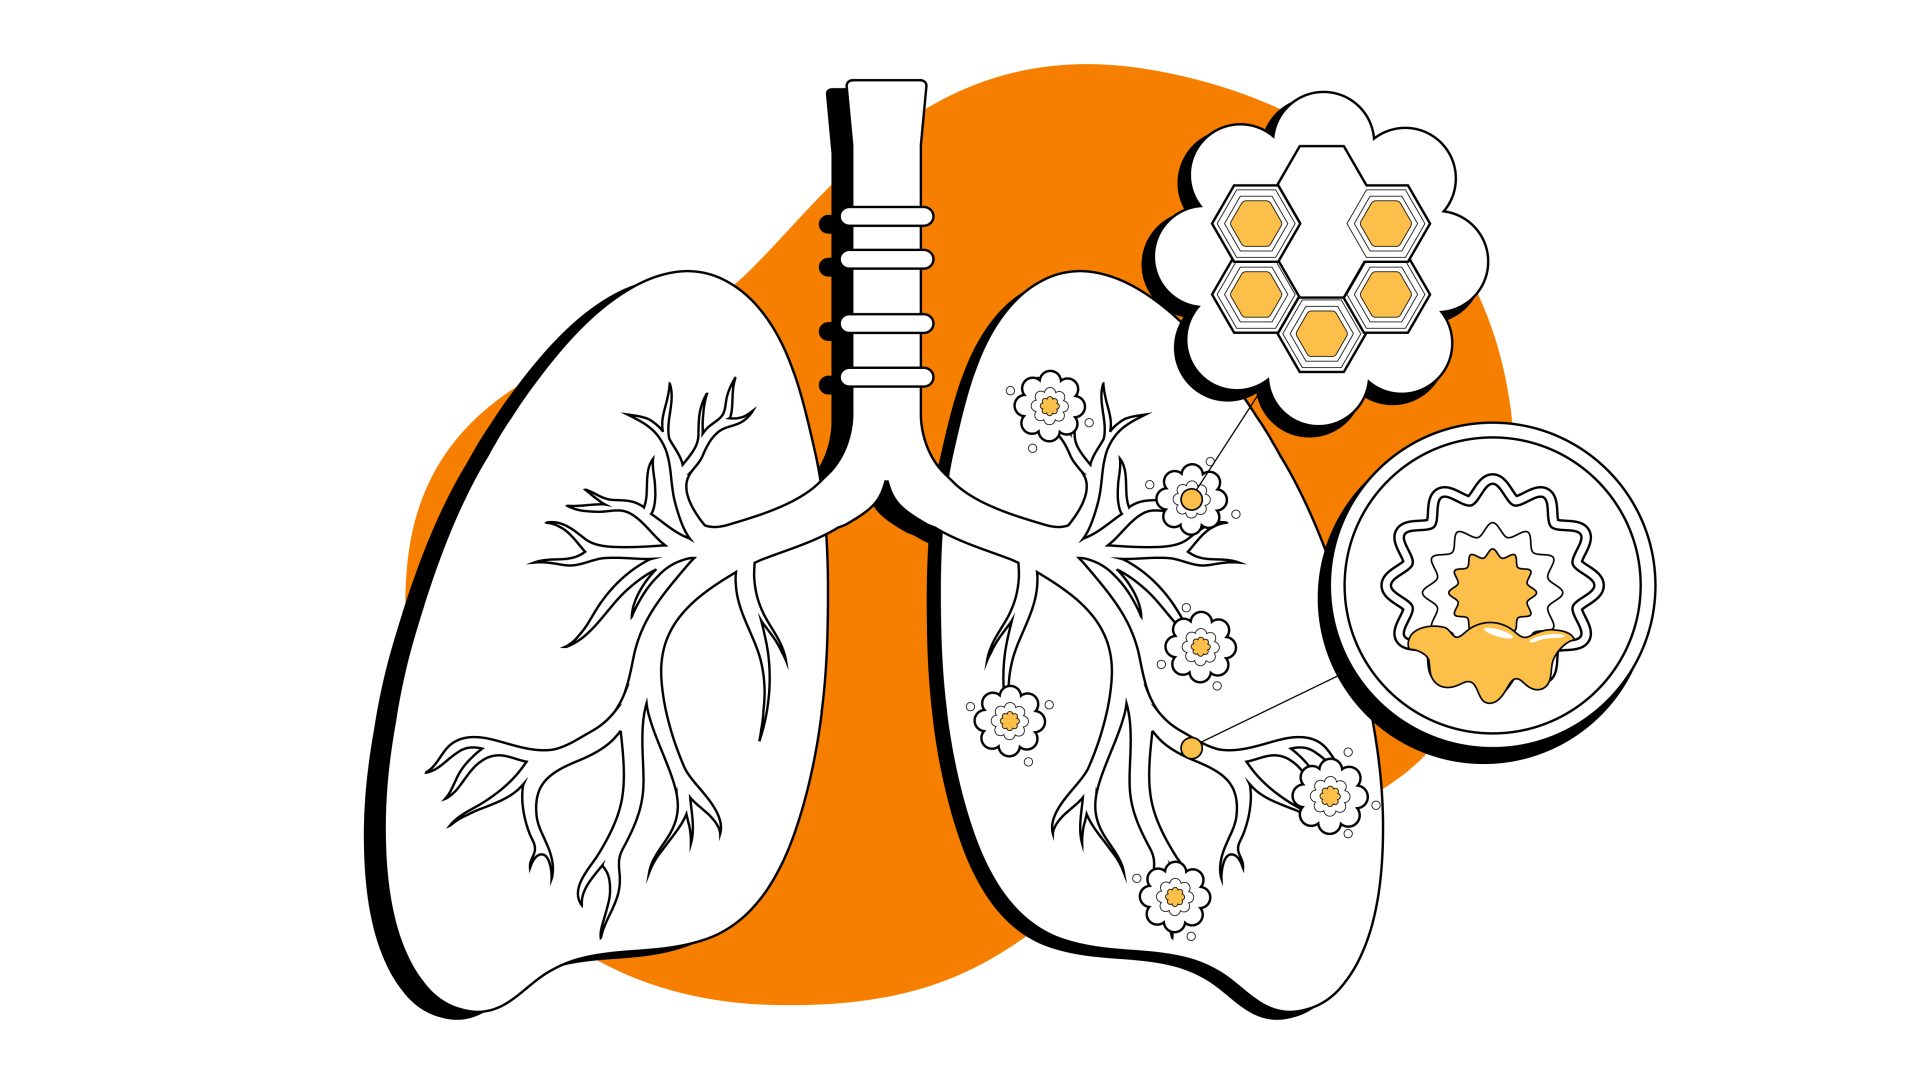 Illustration of lungs with COPD